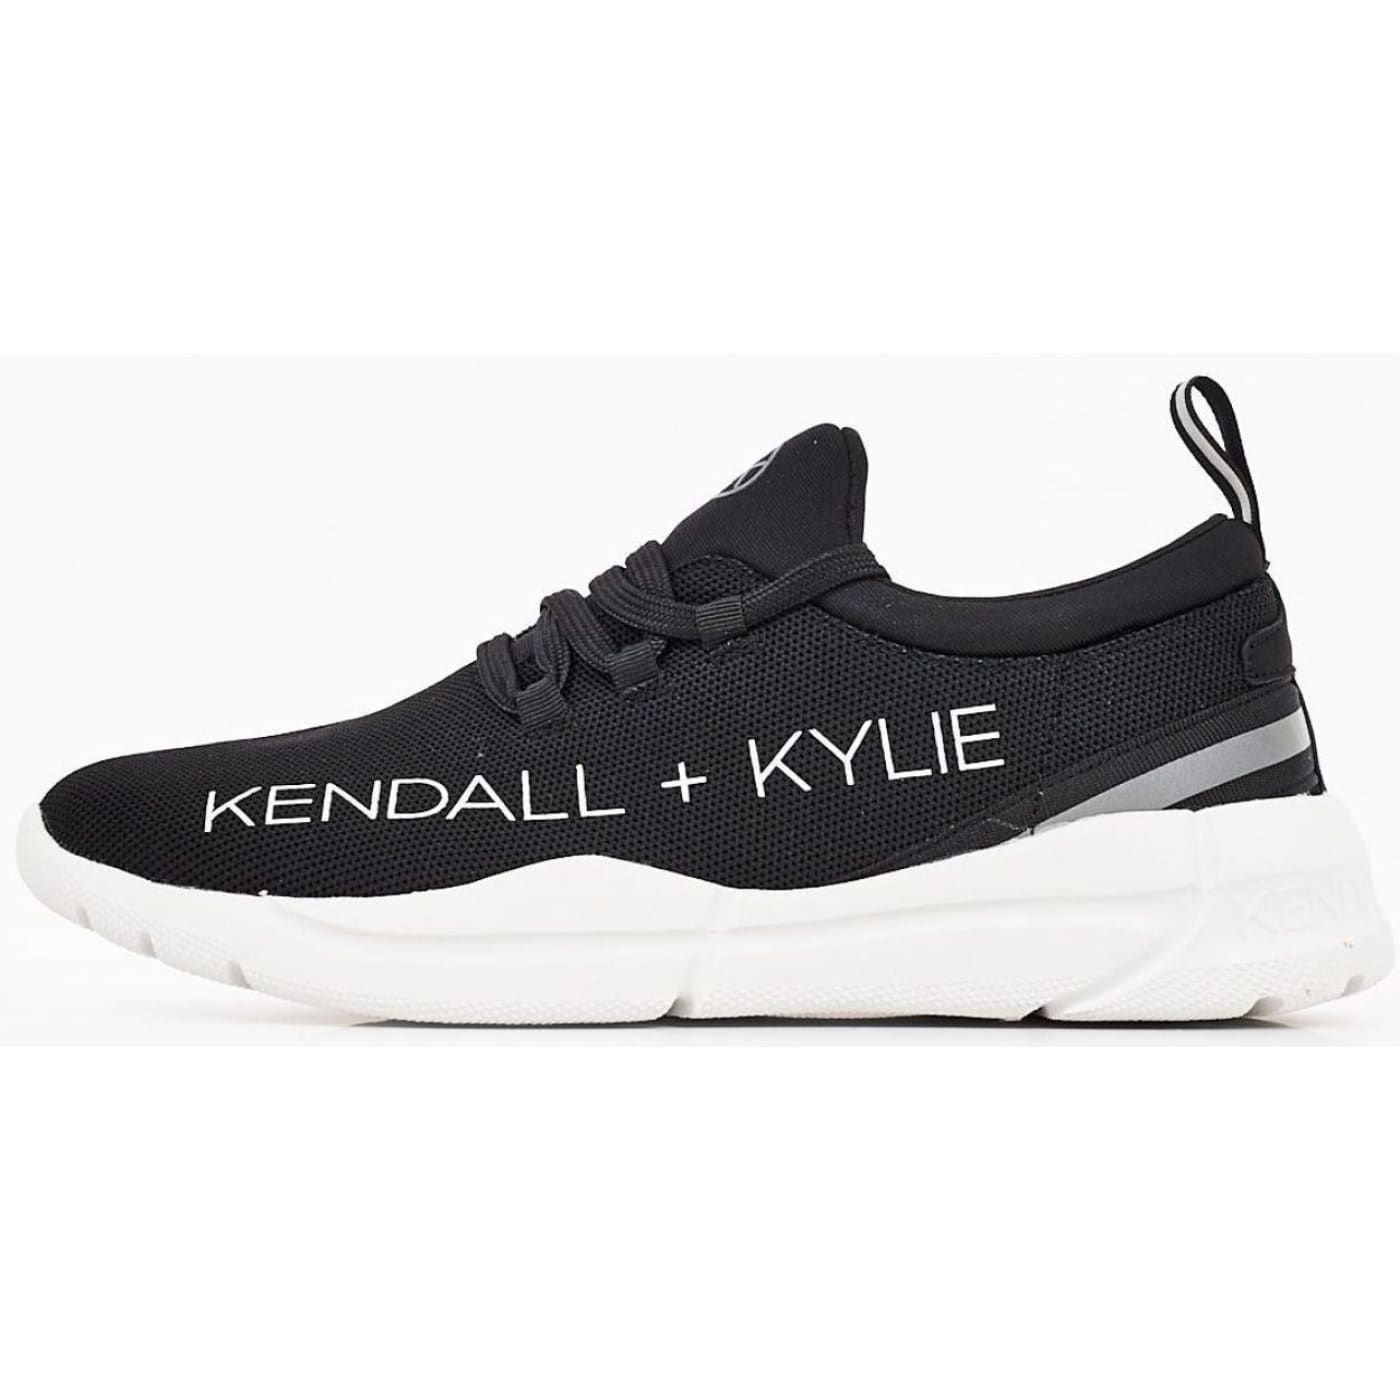 KENDALL KYLIE Equator Black White Mesh Trainers – Top Shoes